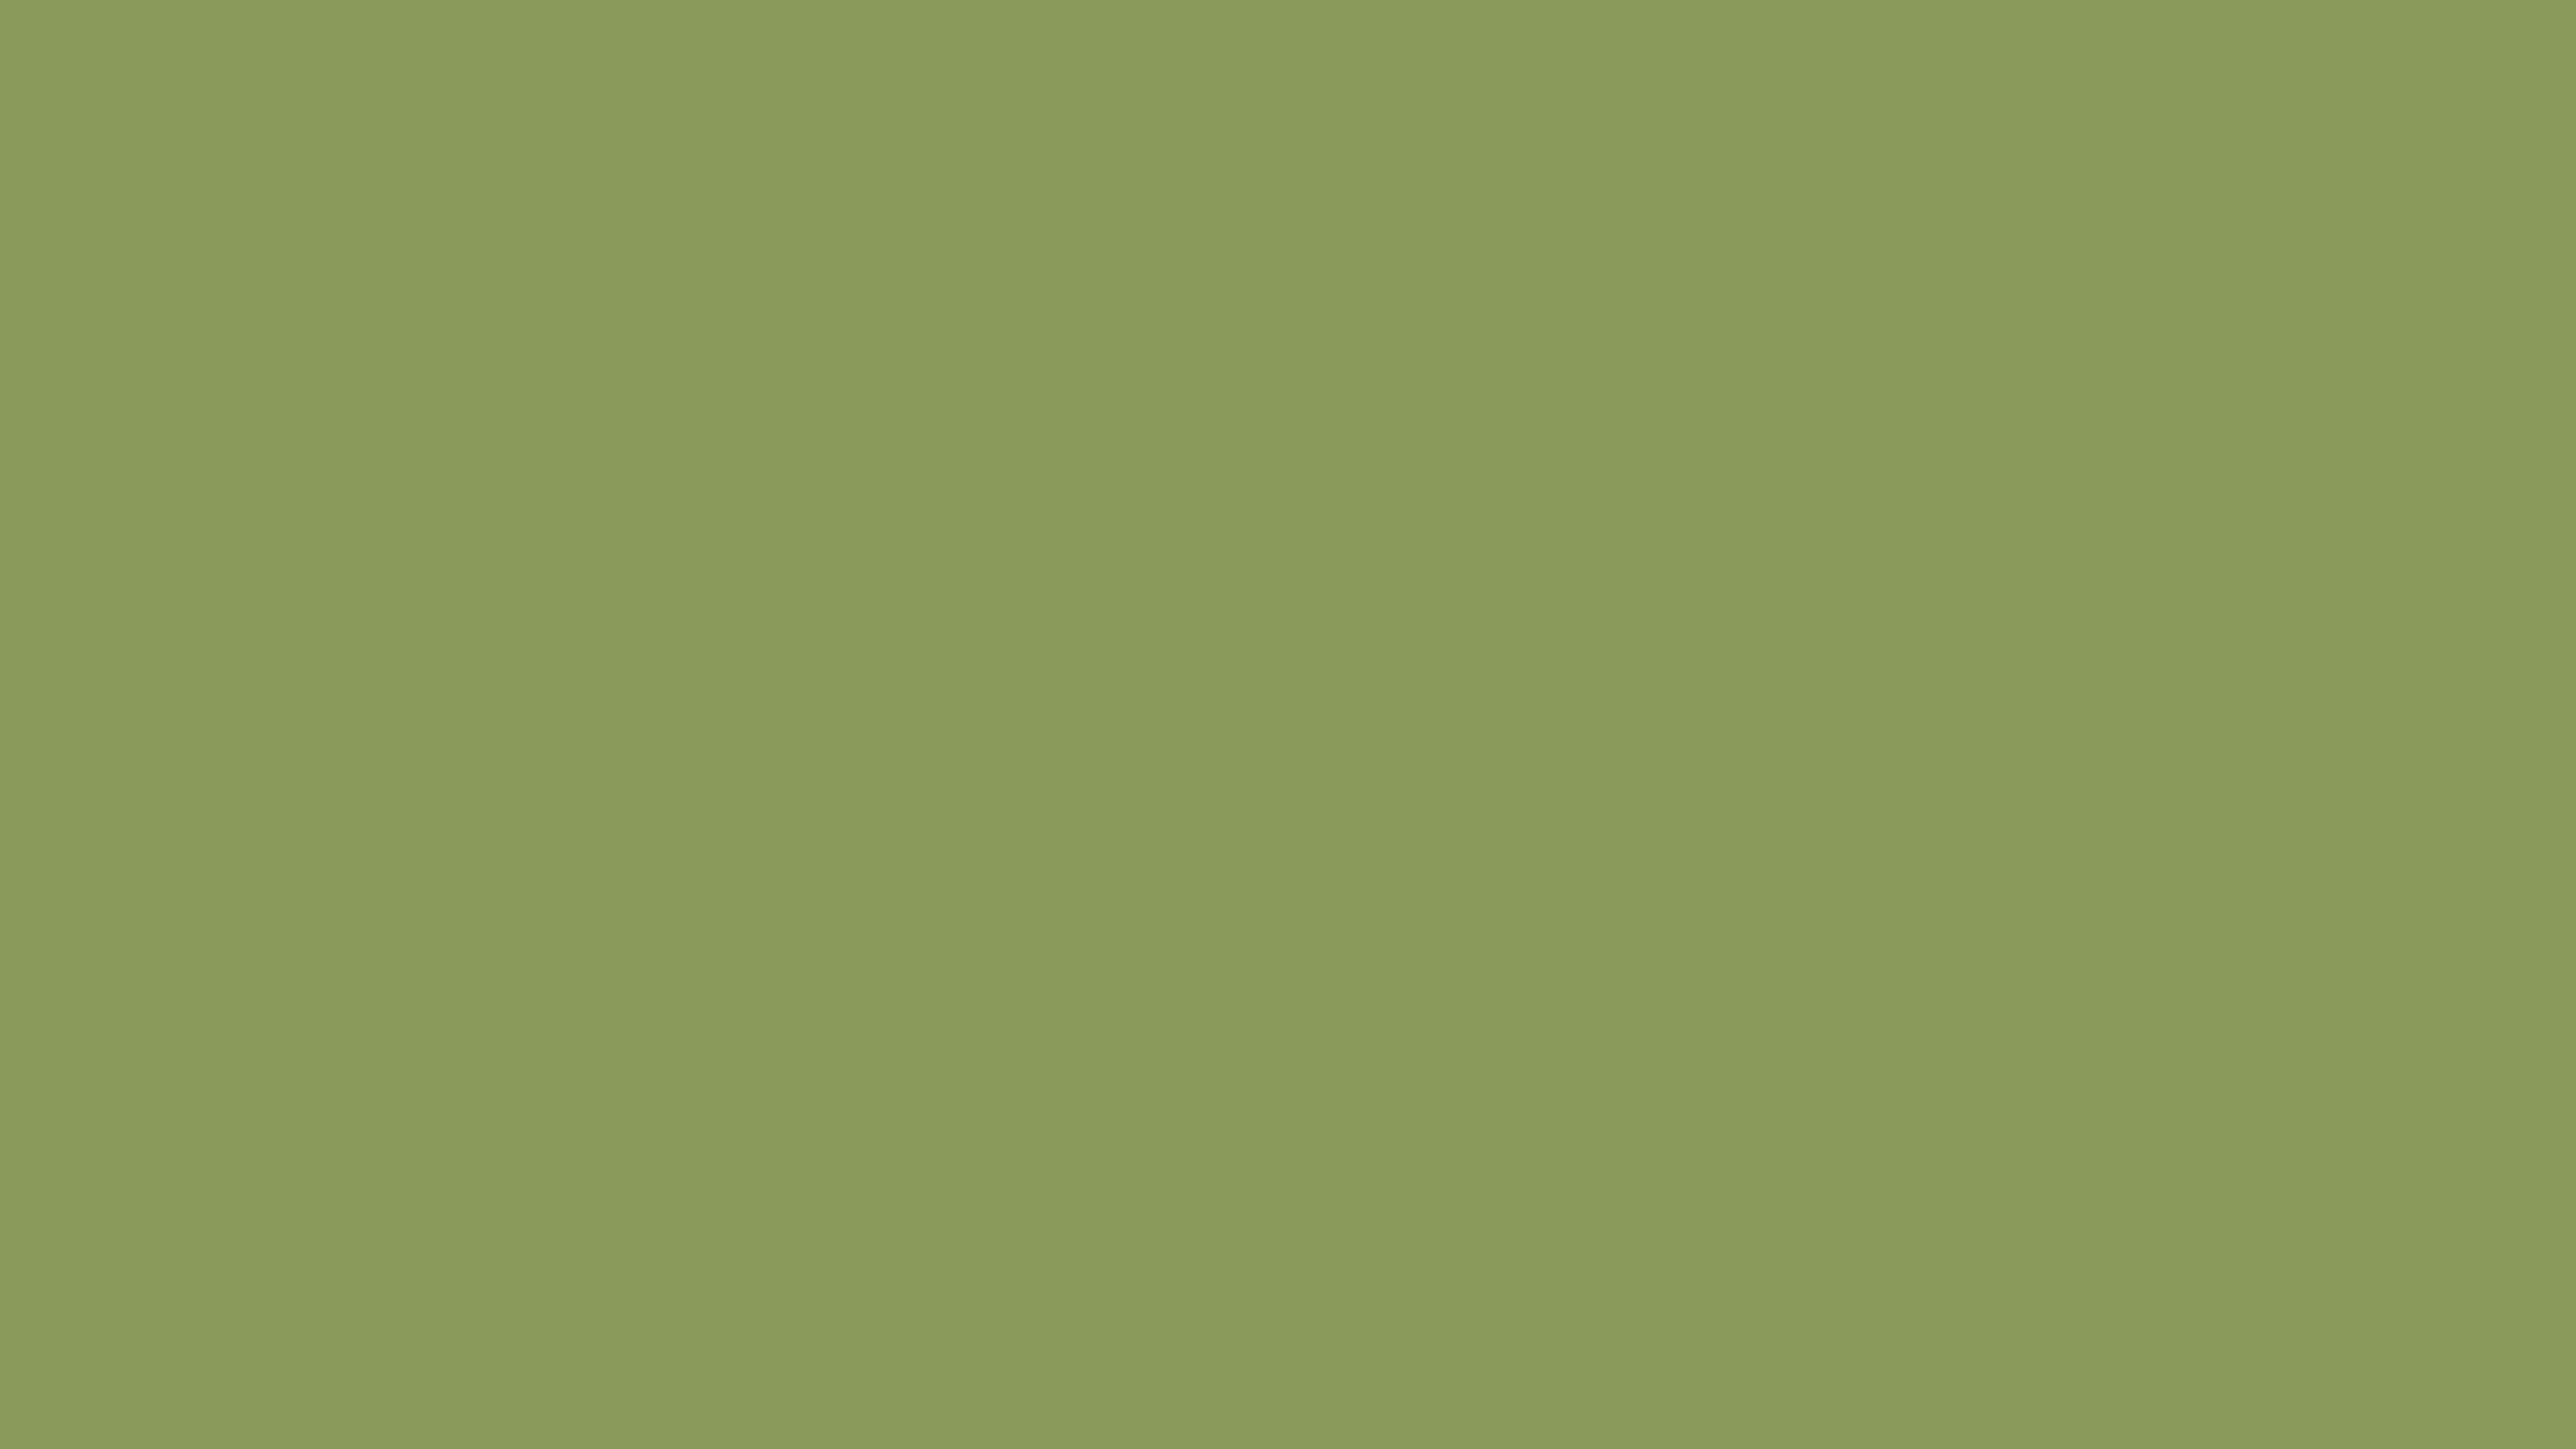 3840x2160 Moss Green Solid Color Background